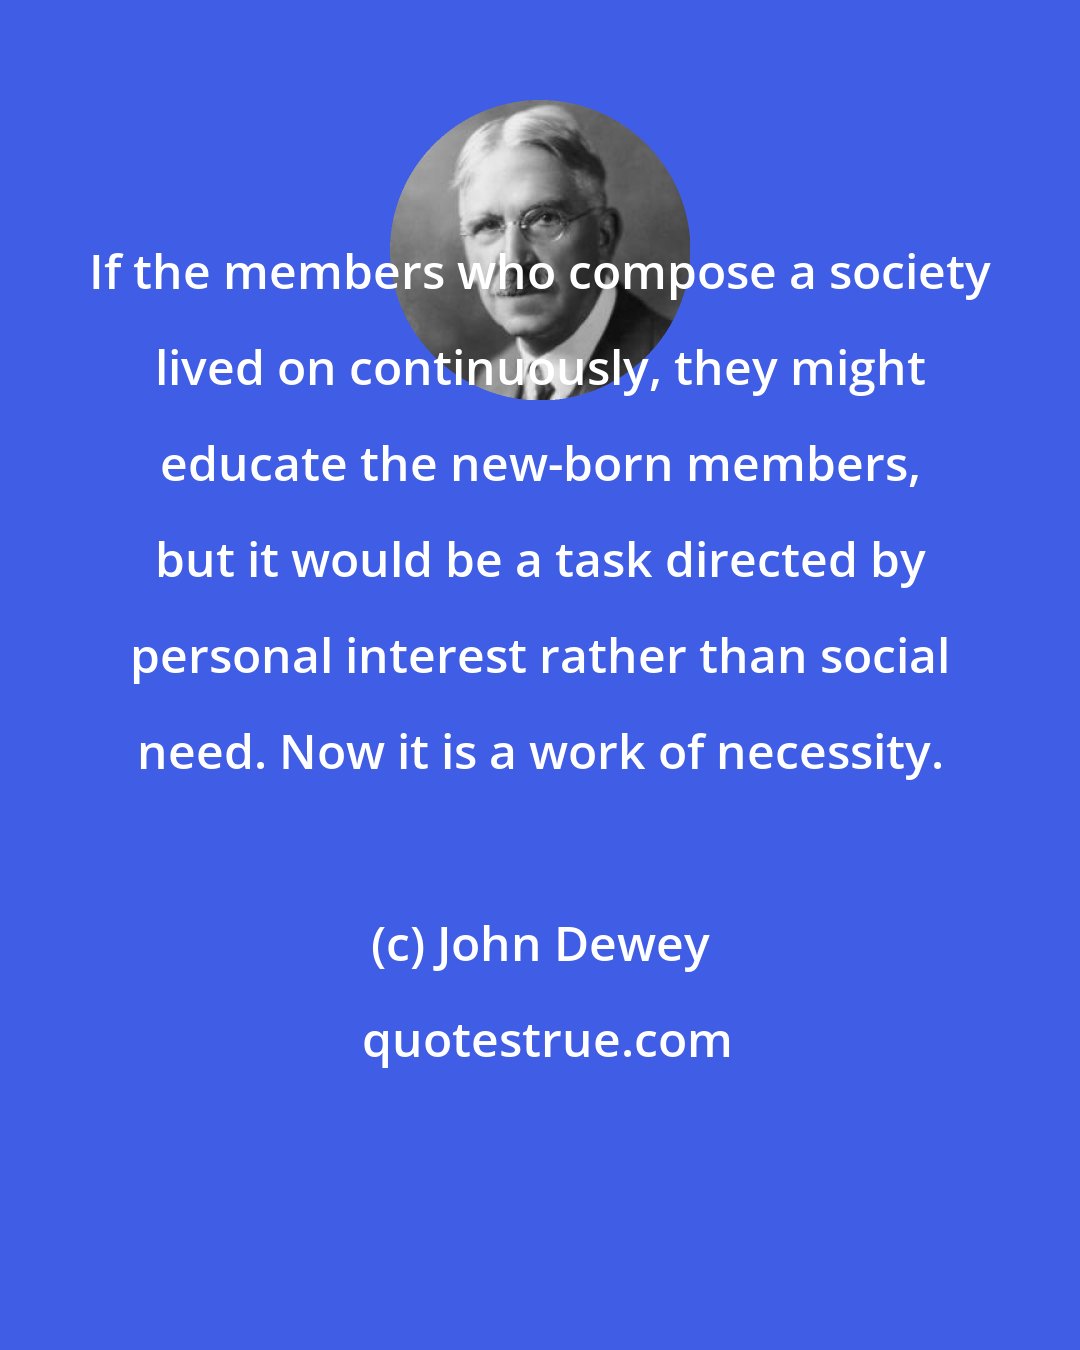 John Dewey: If the members who compose a society lived on continuously, they might educate the new-born members, but it would be a task directed by personal interest rather than social need. Now it is a work of necessity.